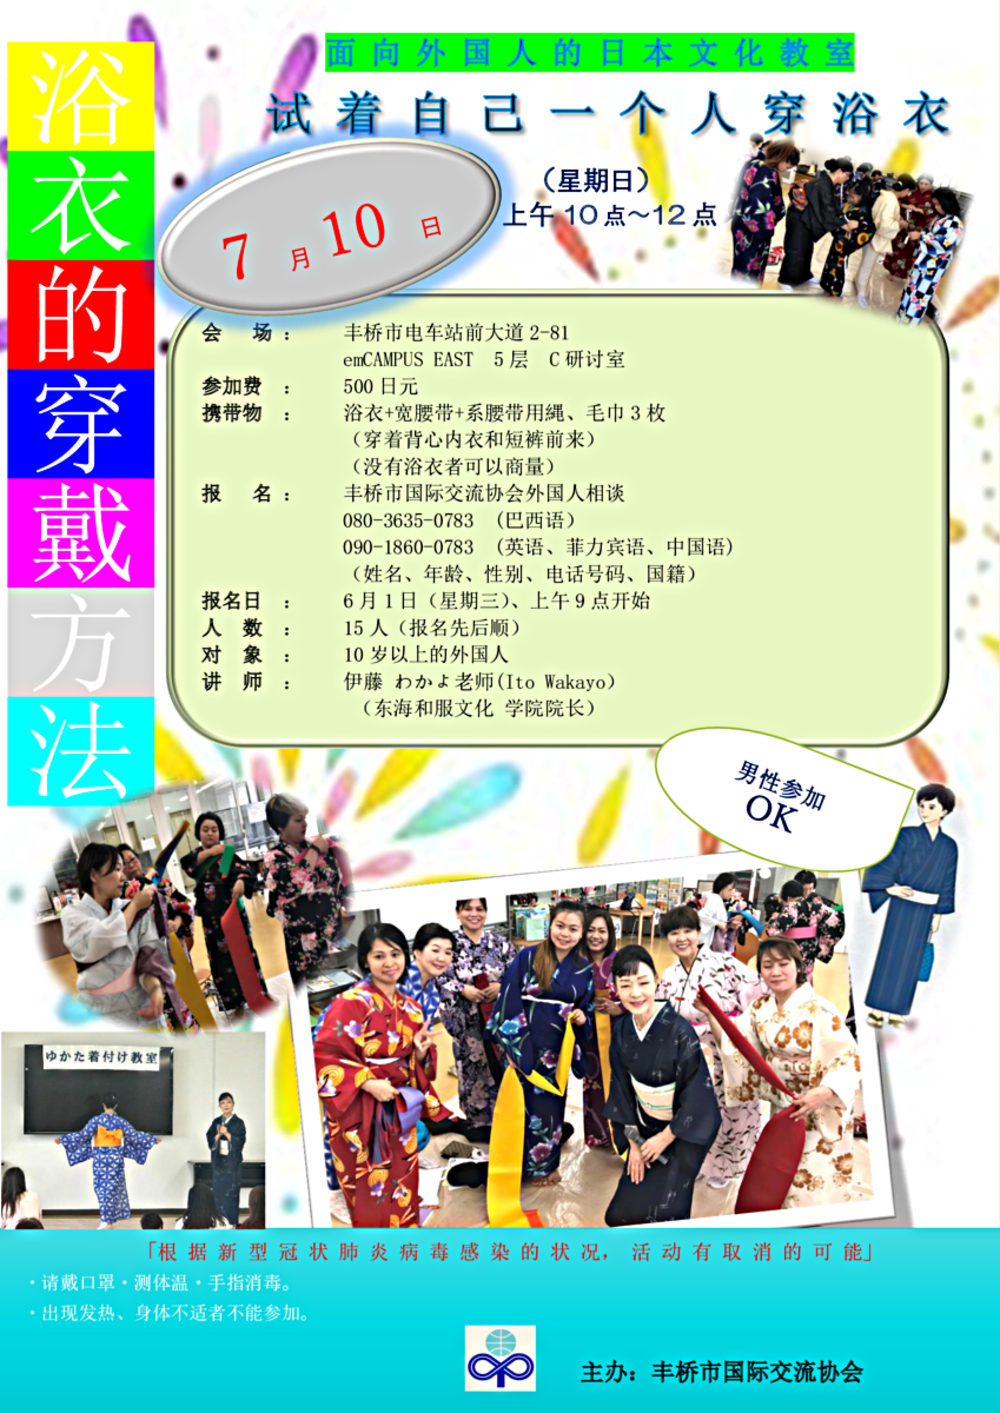 Face-to-face foreigner Japanese culture class "Yukata-like wearing method"